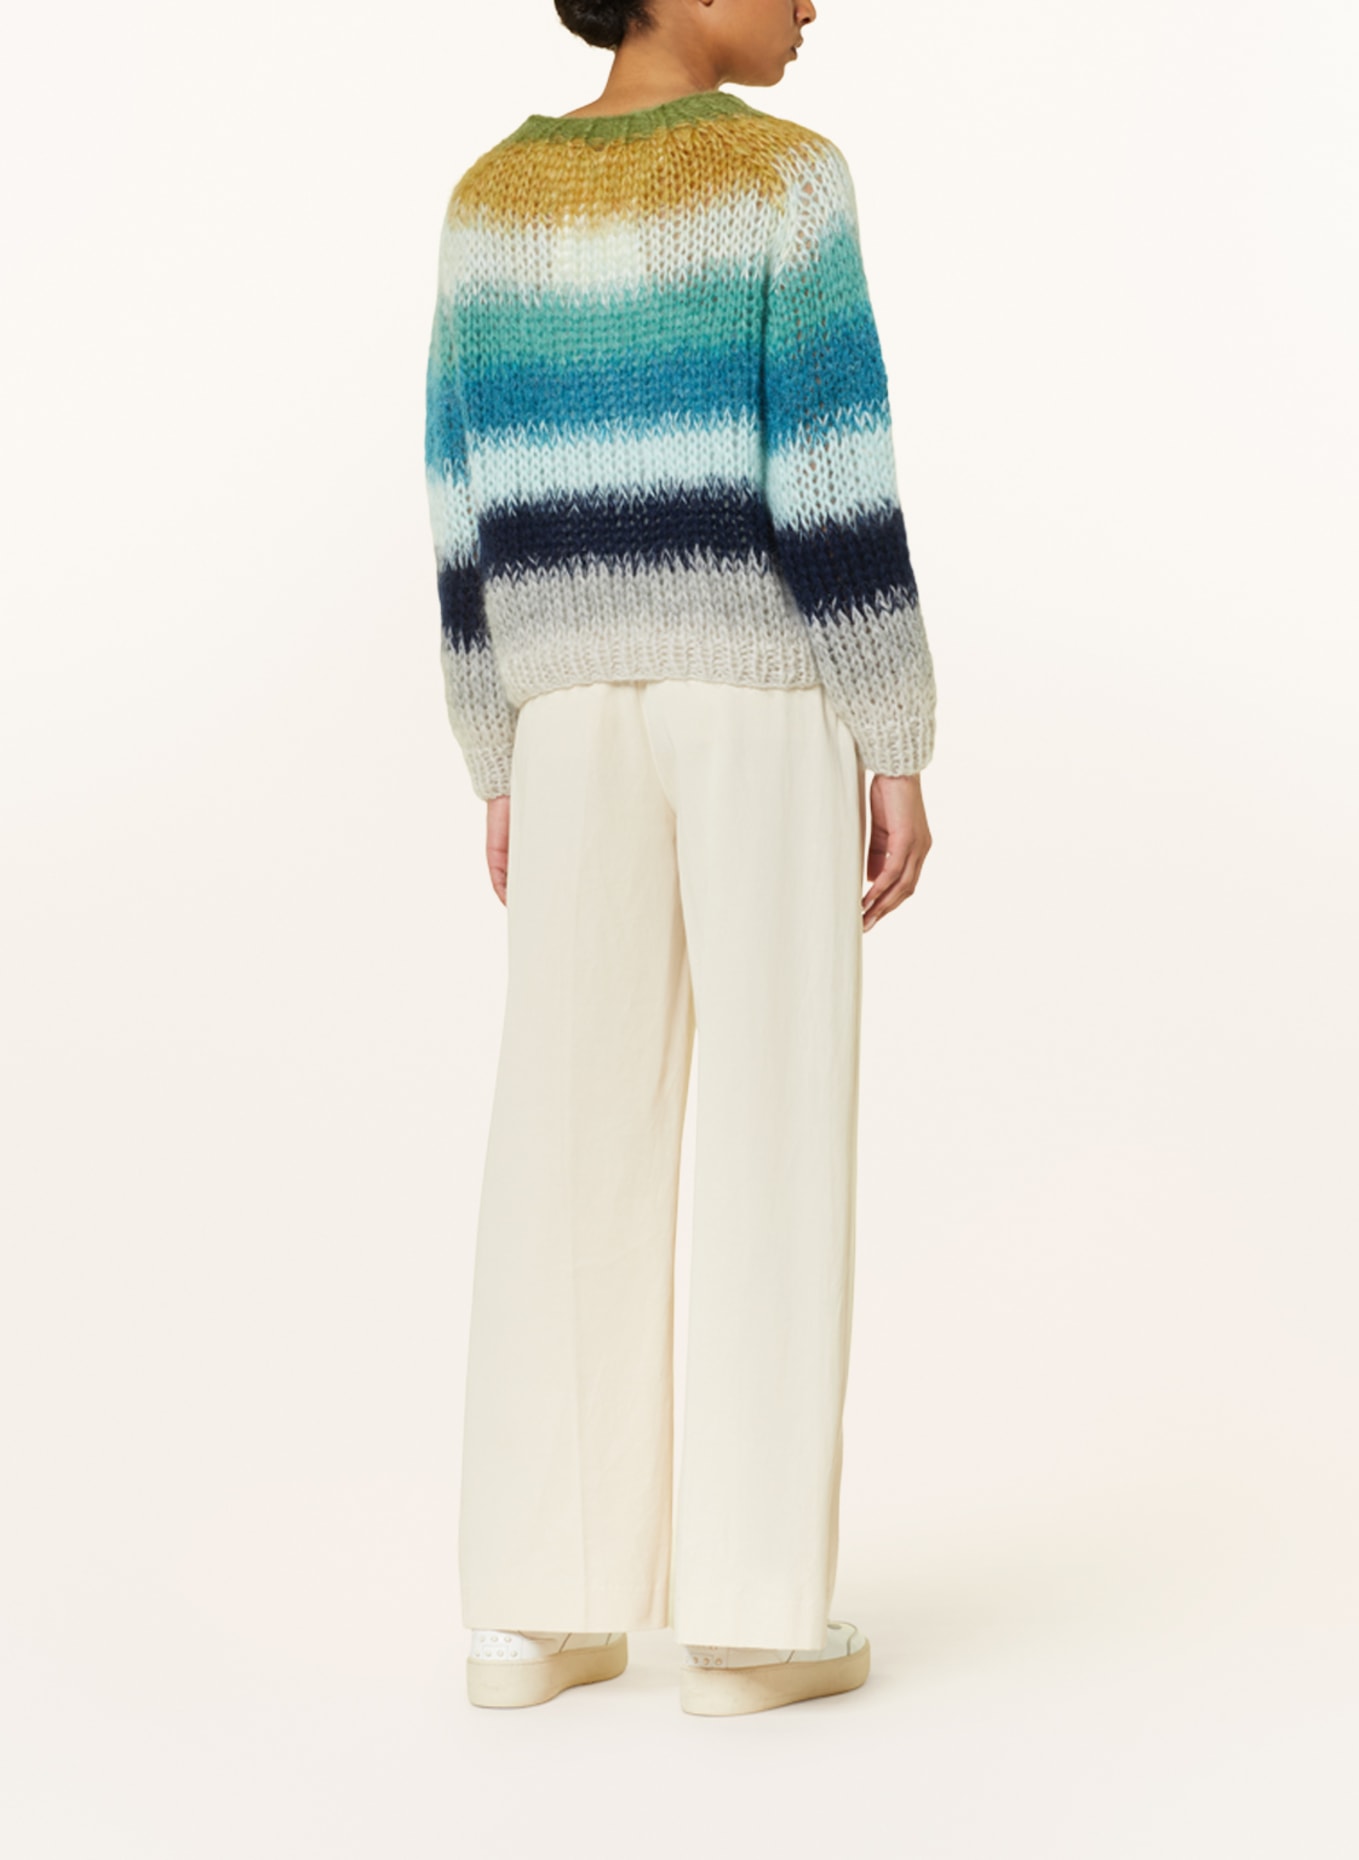 MAIAMI Sweater with mohair, Color: GREEN/ BLUE/ GRAY (Image 3)